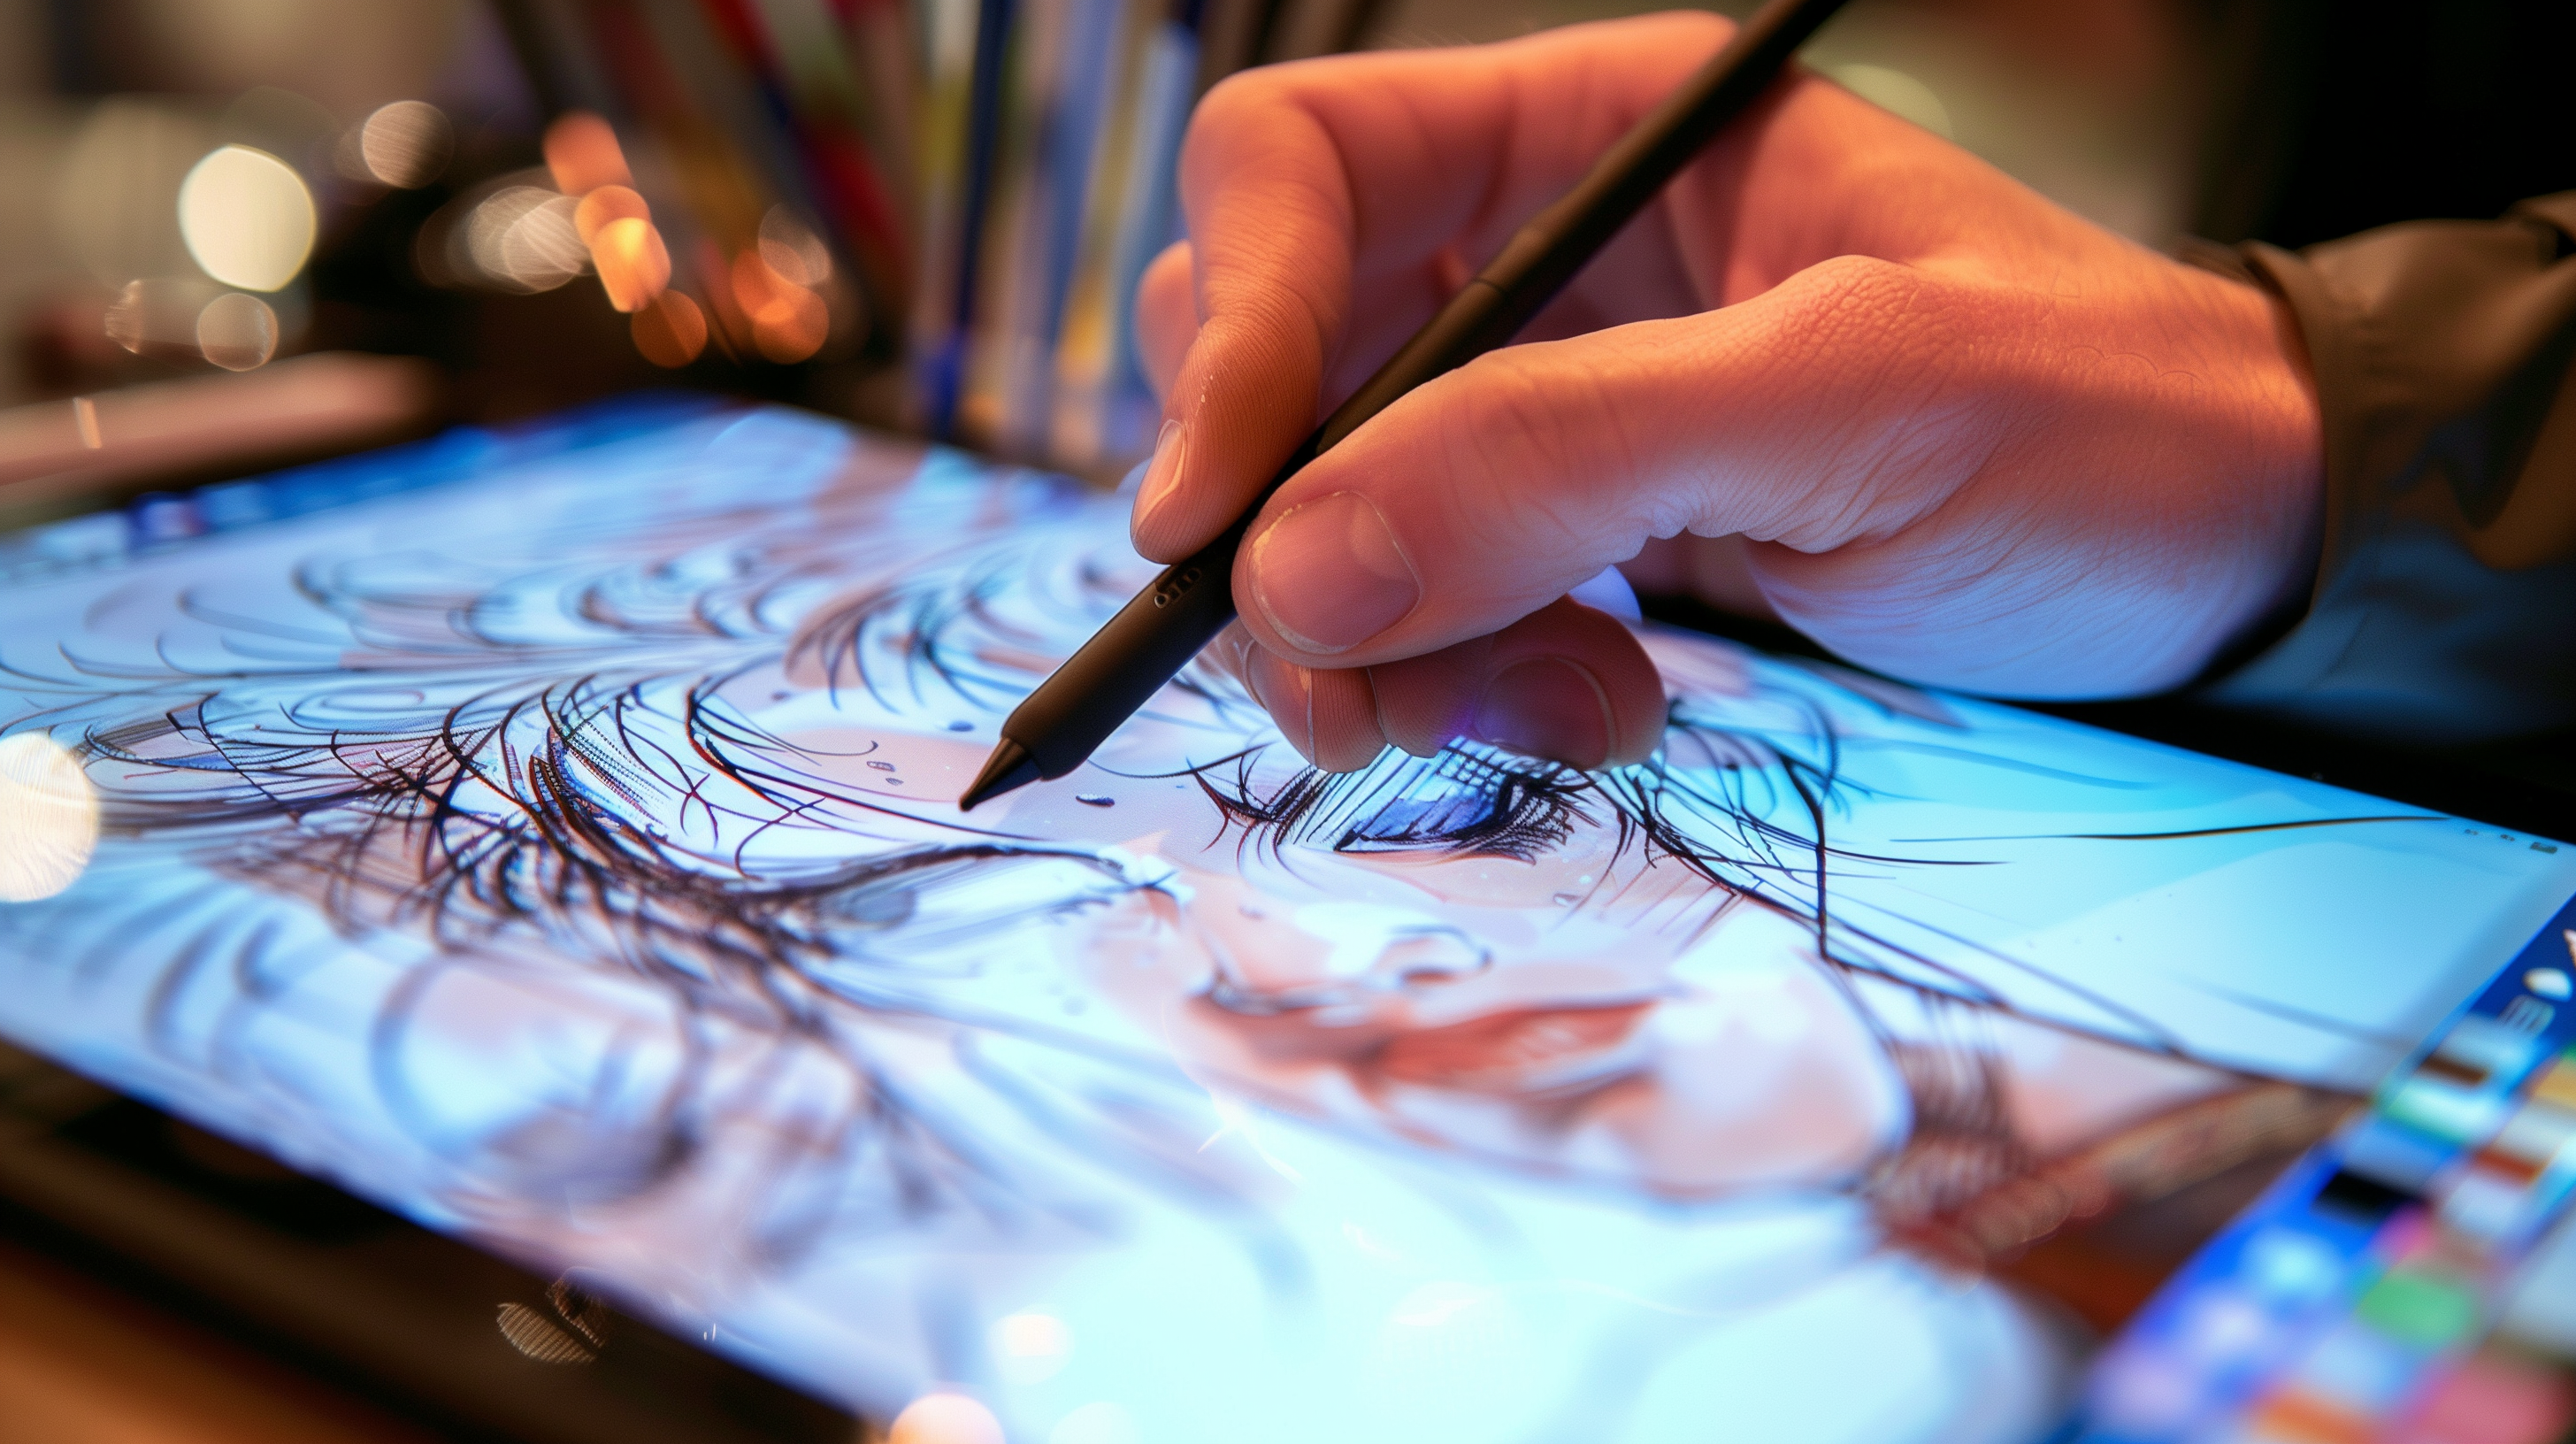 person creating digital art on a drawing tablet